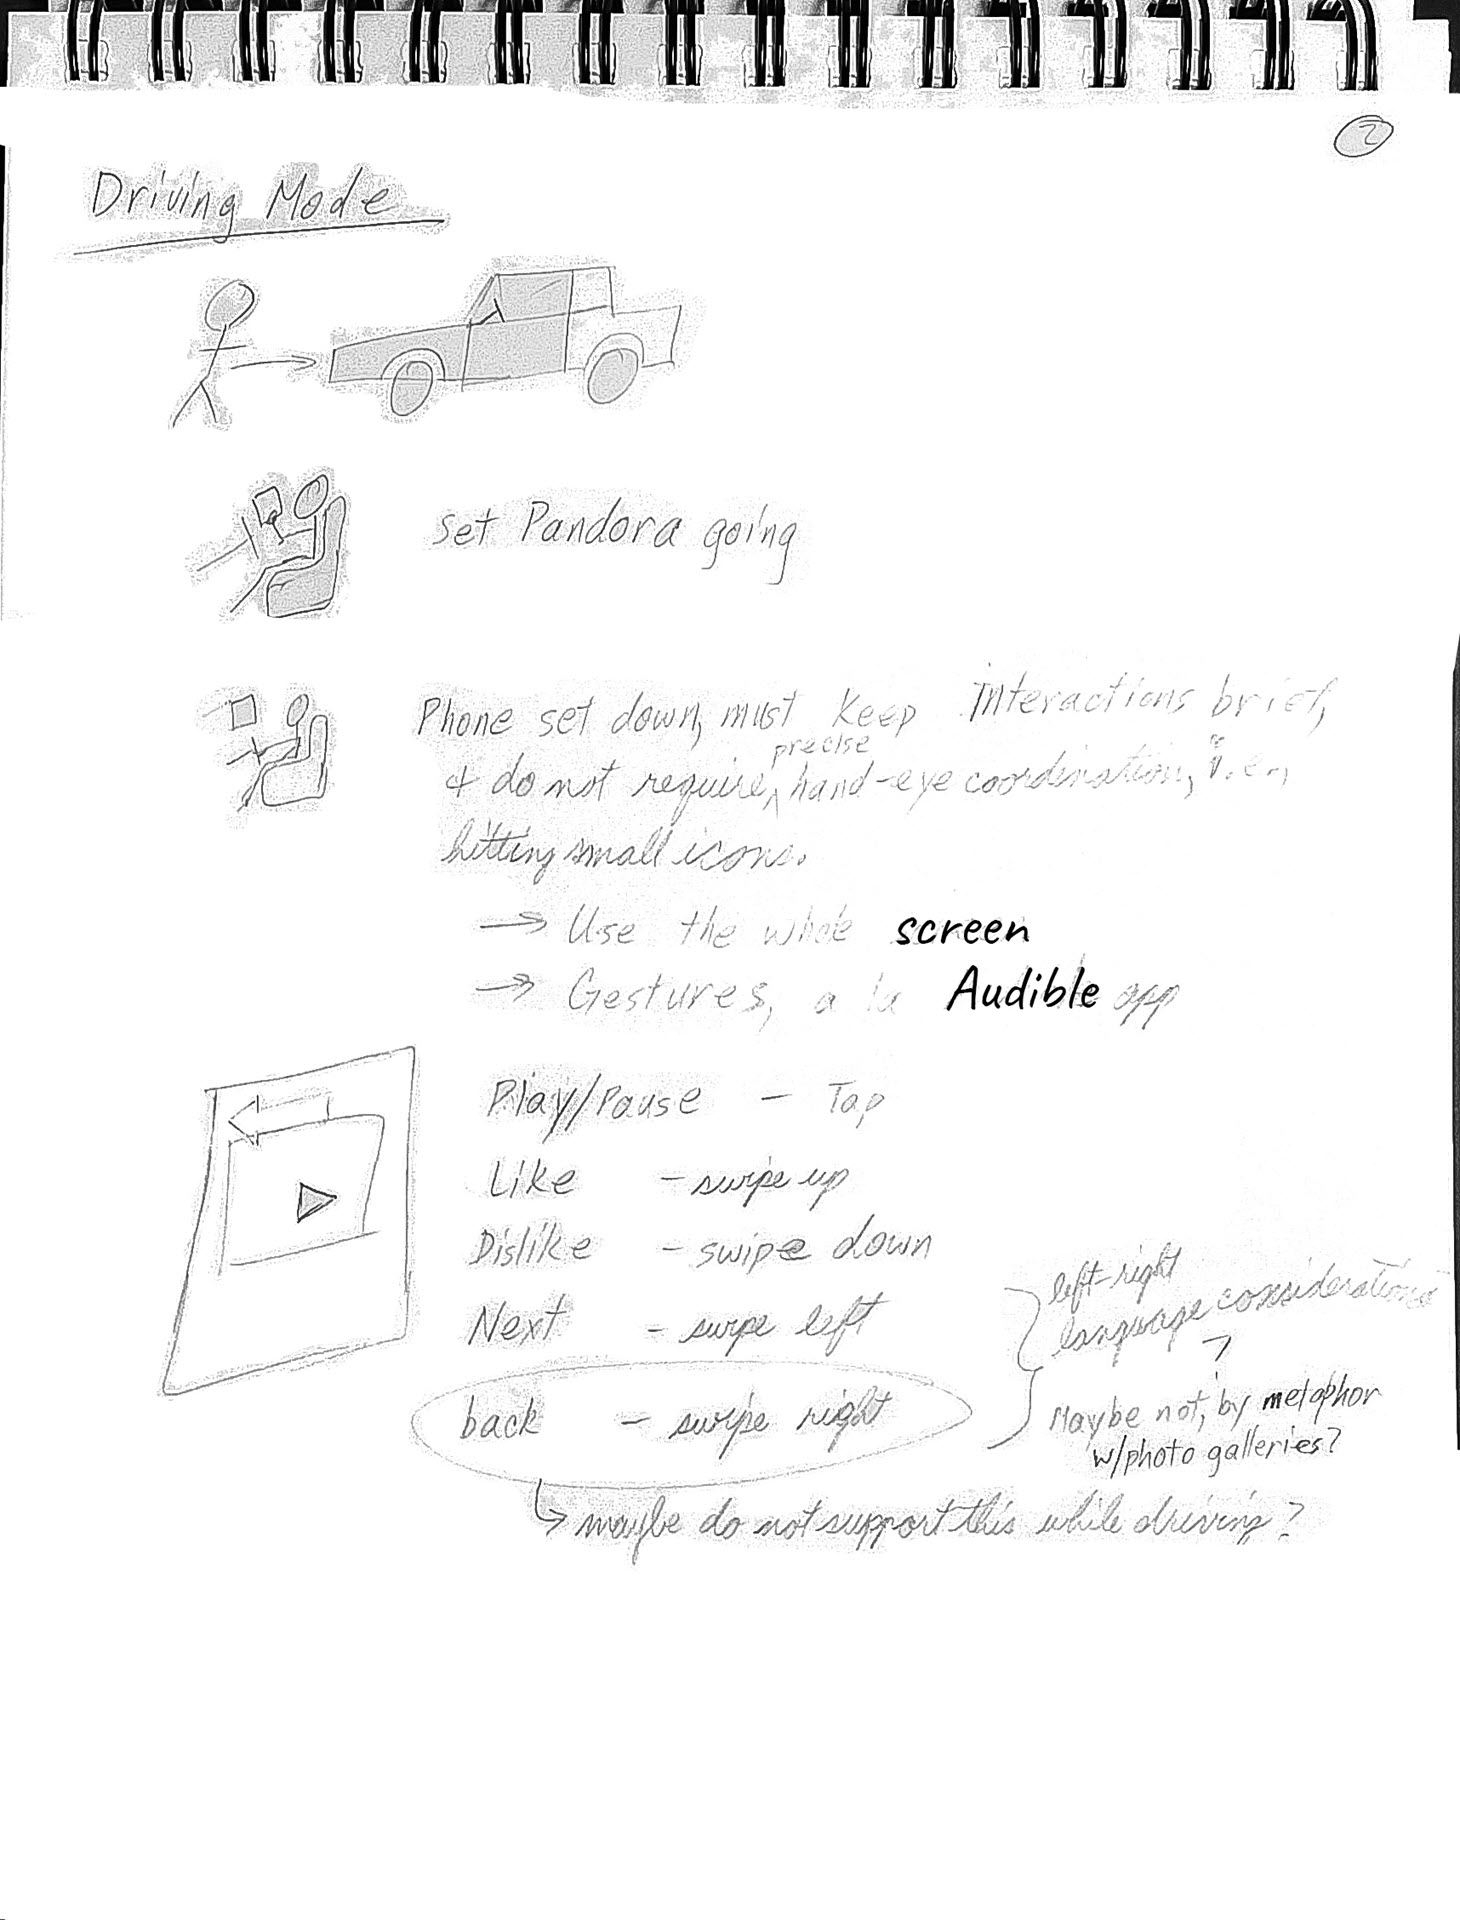 Samsung-Design-Challenge-2014-10-08-Notes-and-sketches-02-cleaned-1920